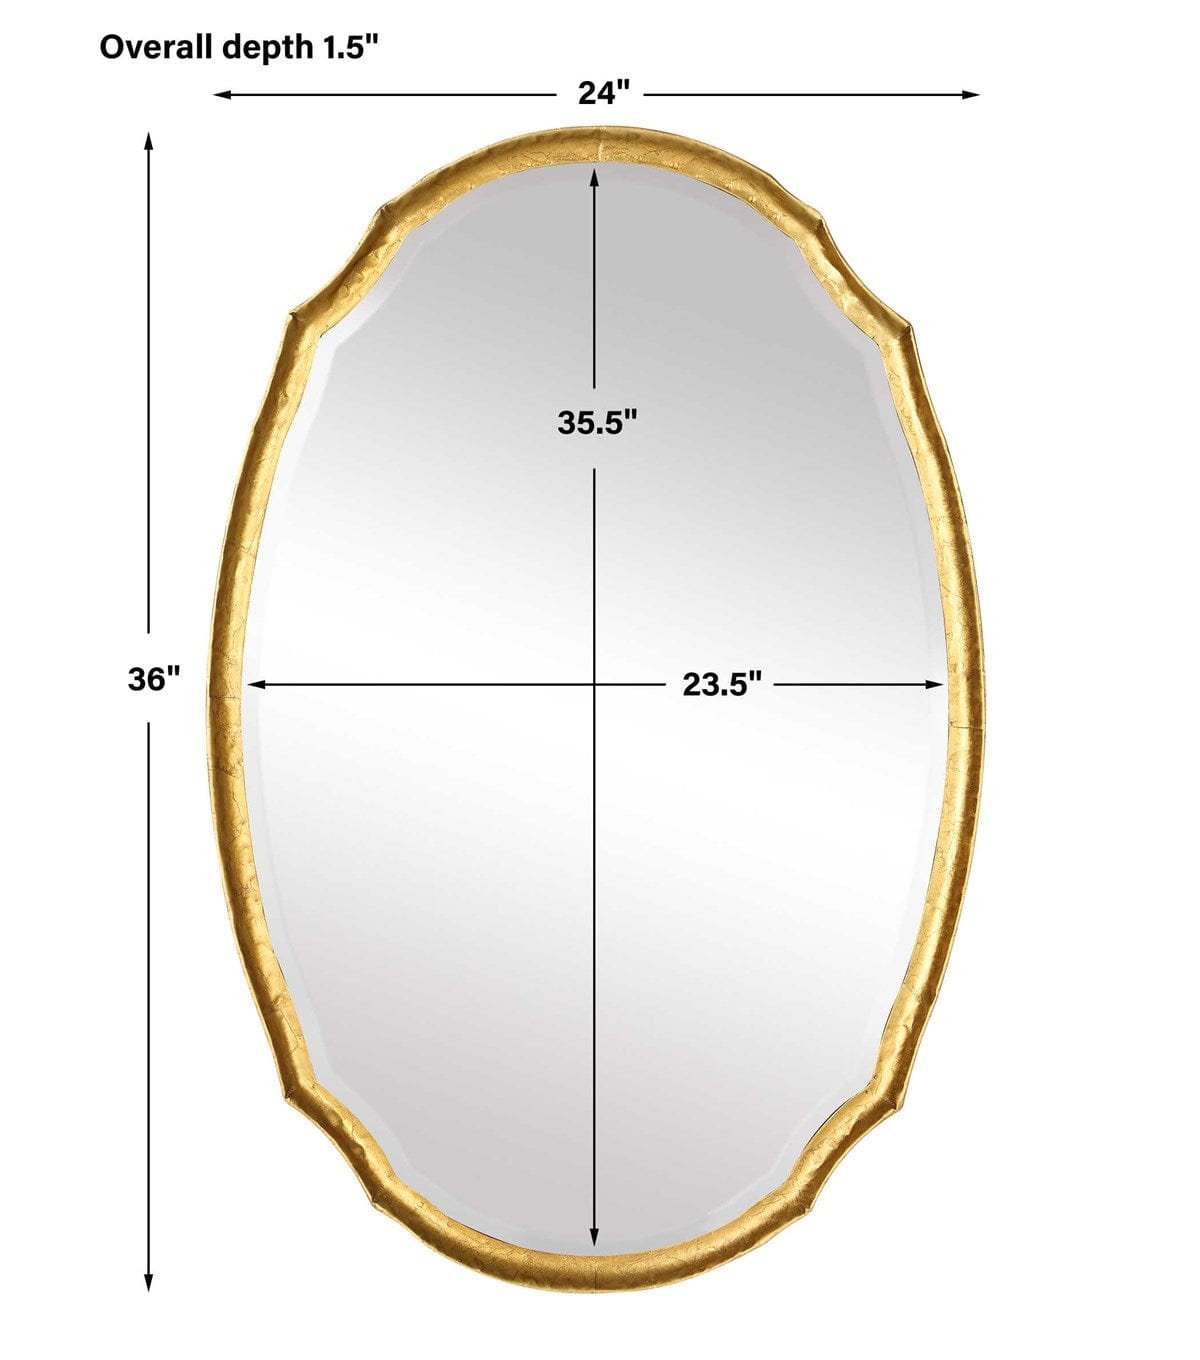 Oval Shaped Gold Mirror Uttermost